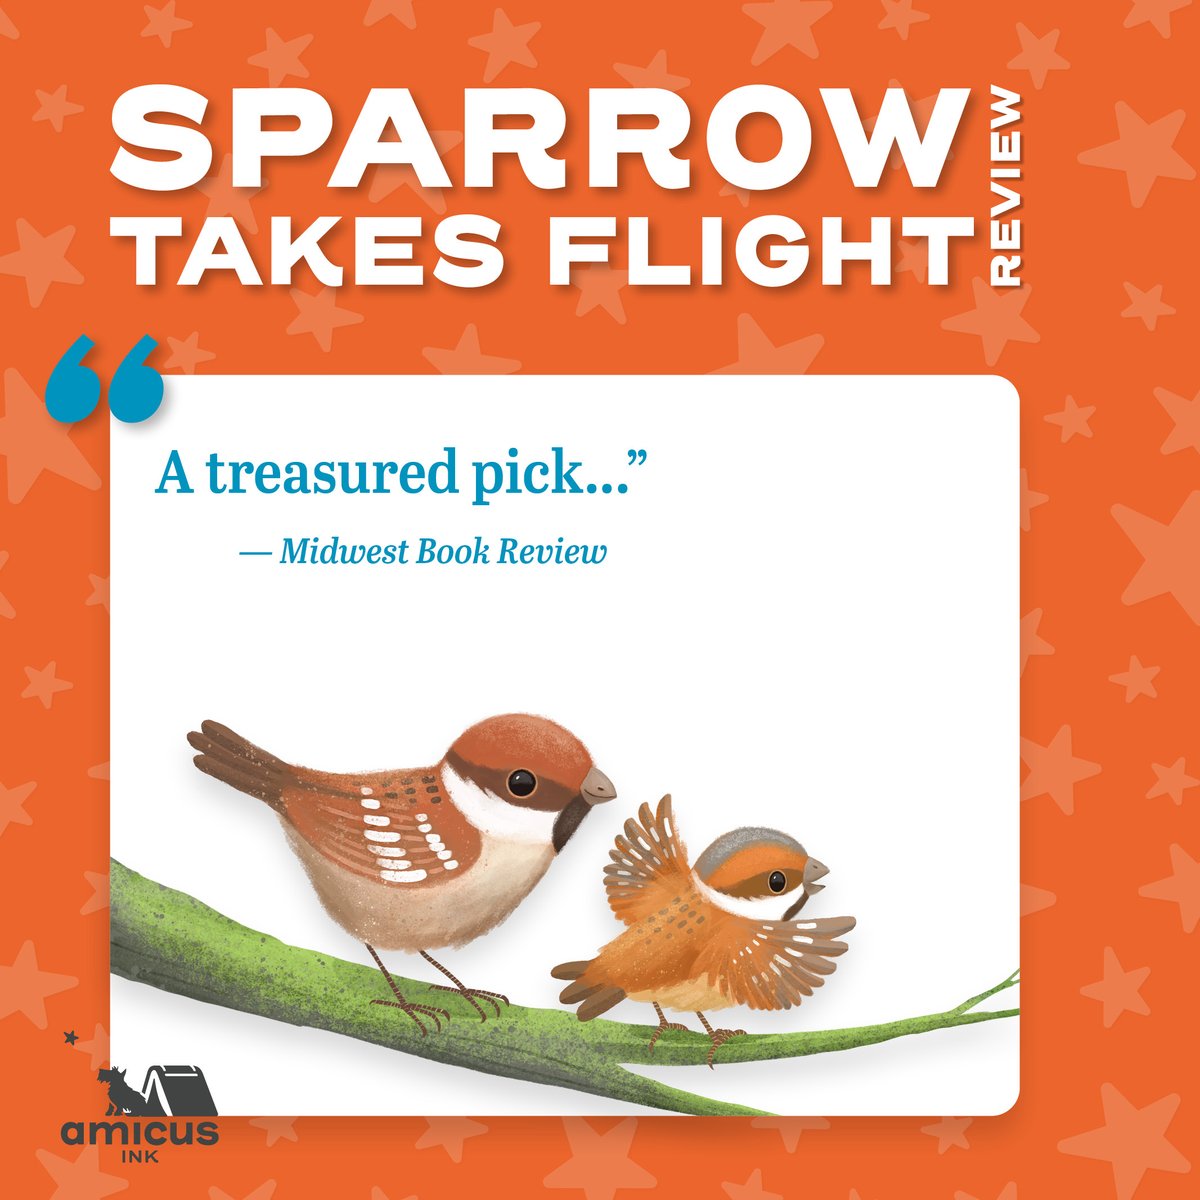 Another new addition to the Little Nature Explorers board book family is Sparrow Takes Flight, by @ashayhen and @gavillustrator. amicuspublishing.us/products/sparr… #boardbooks #rhyming #childrensbooks #newbooks #nature #review #bookreview